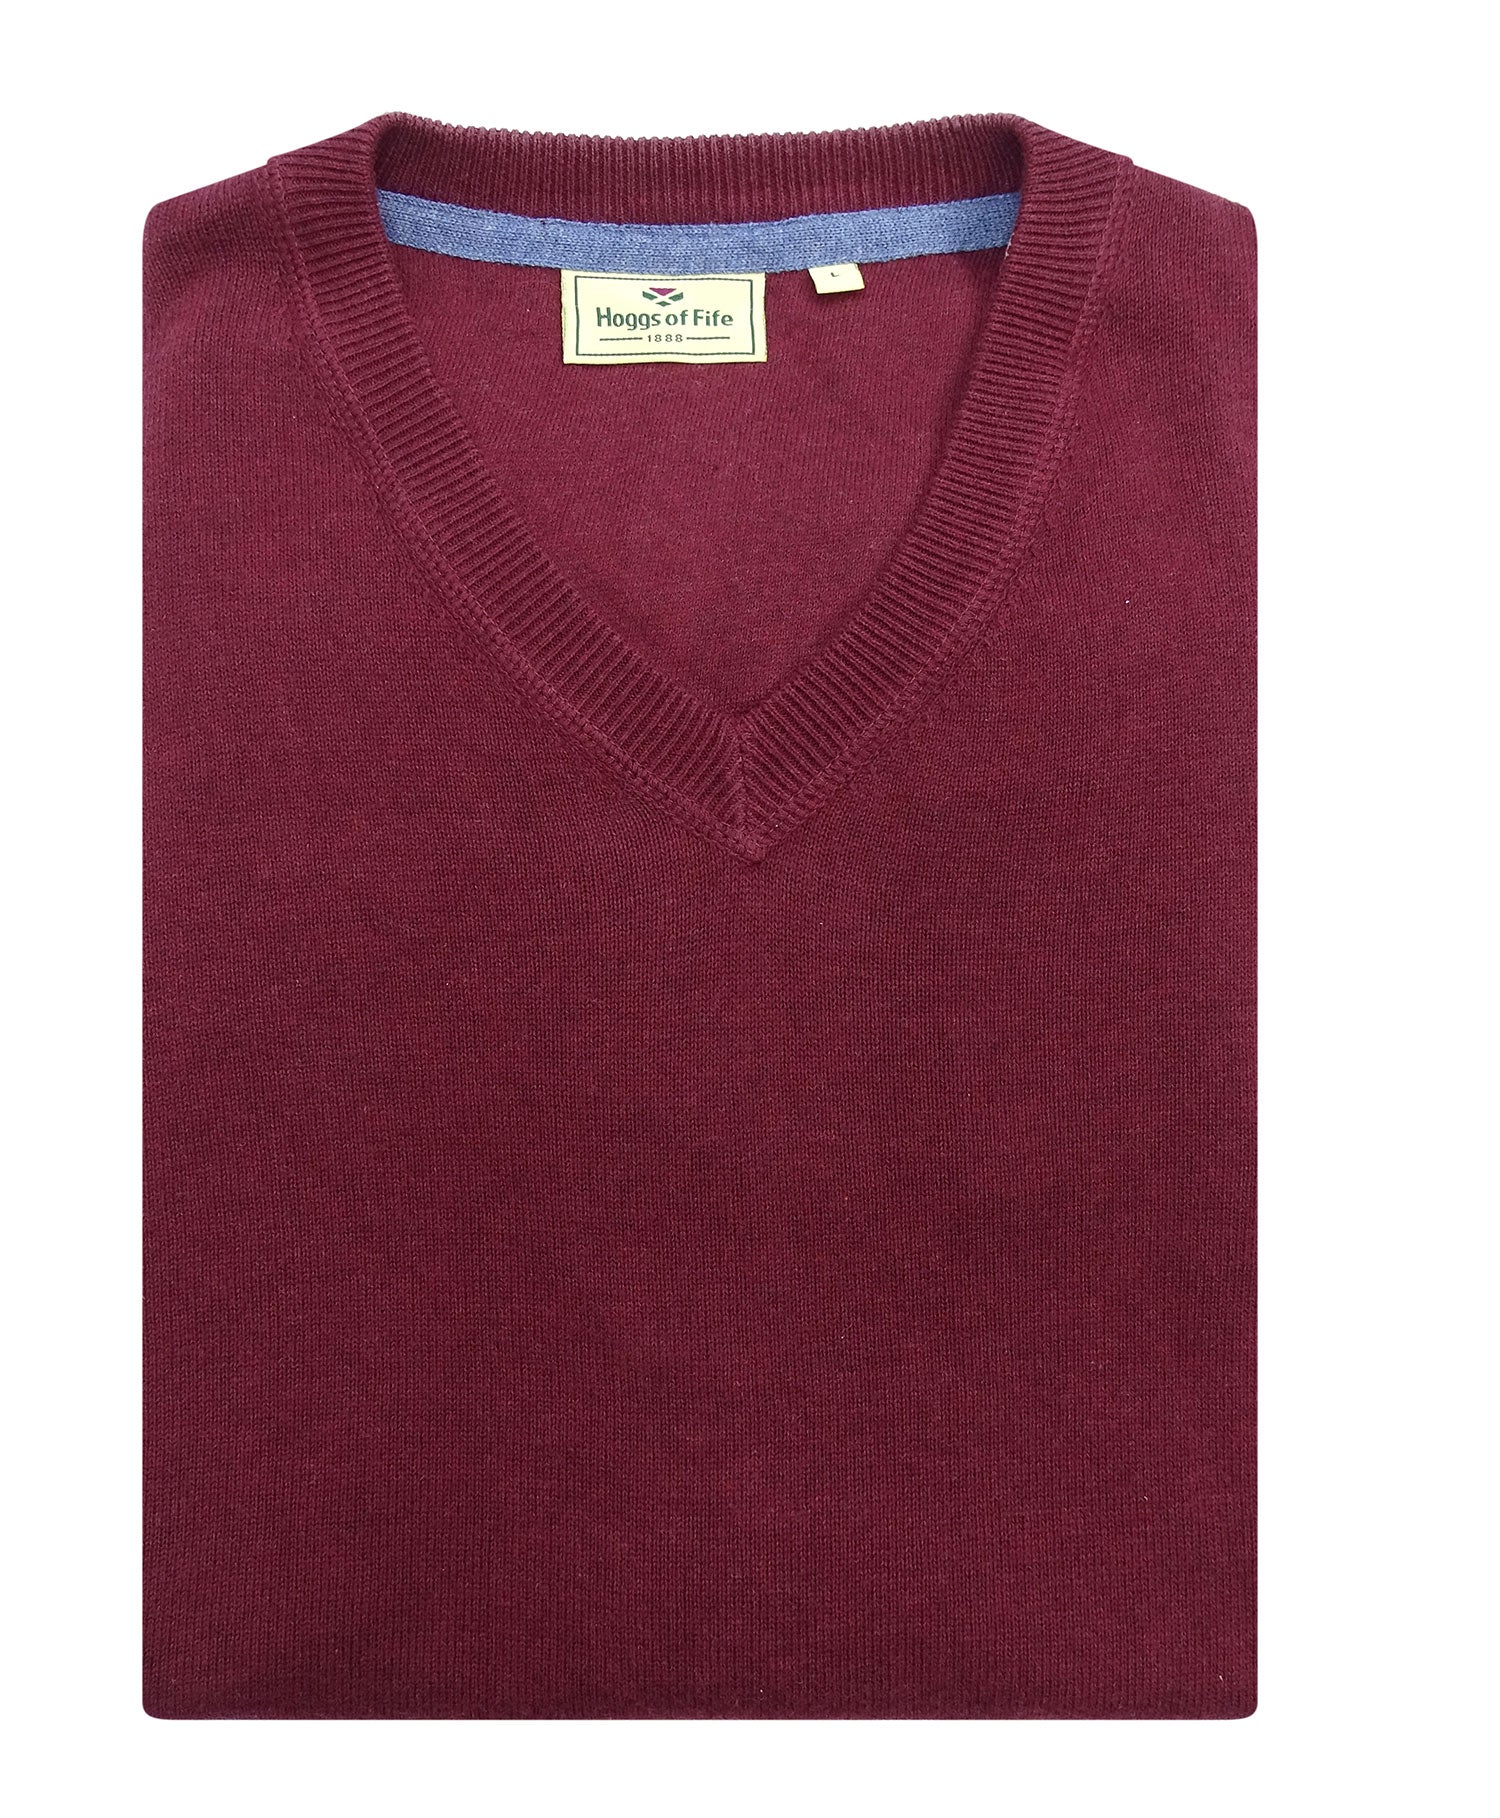 Burgundy Stirling V Neck Cotton Sweater by Hoggs of Fife 